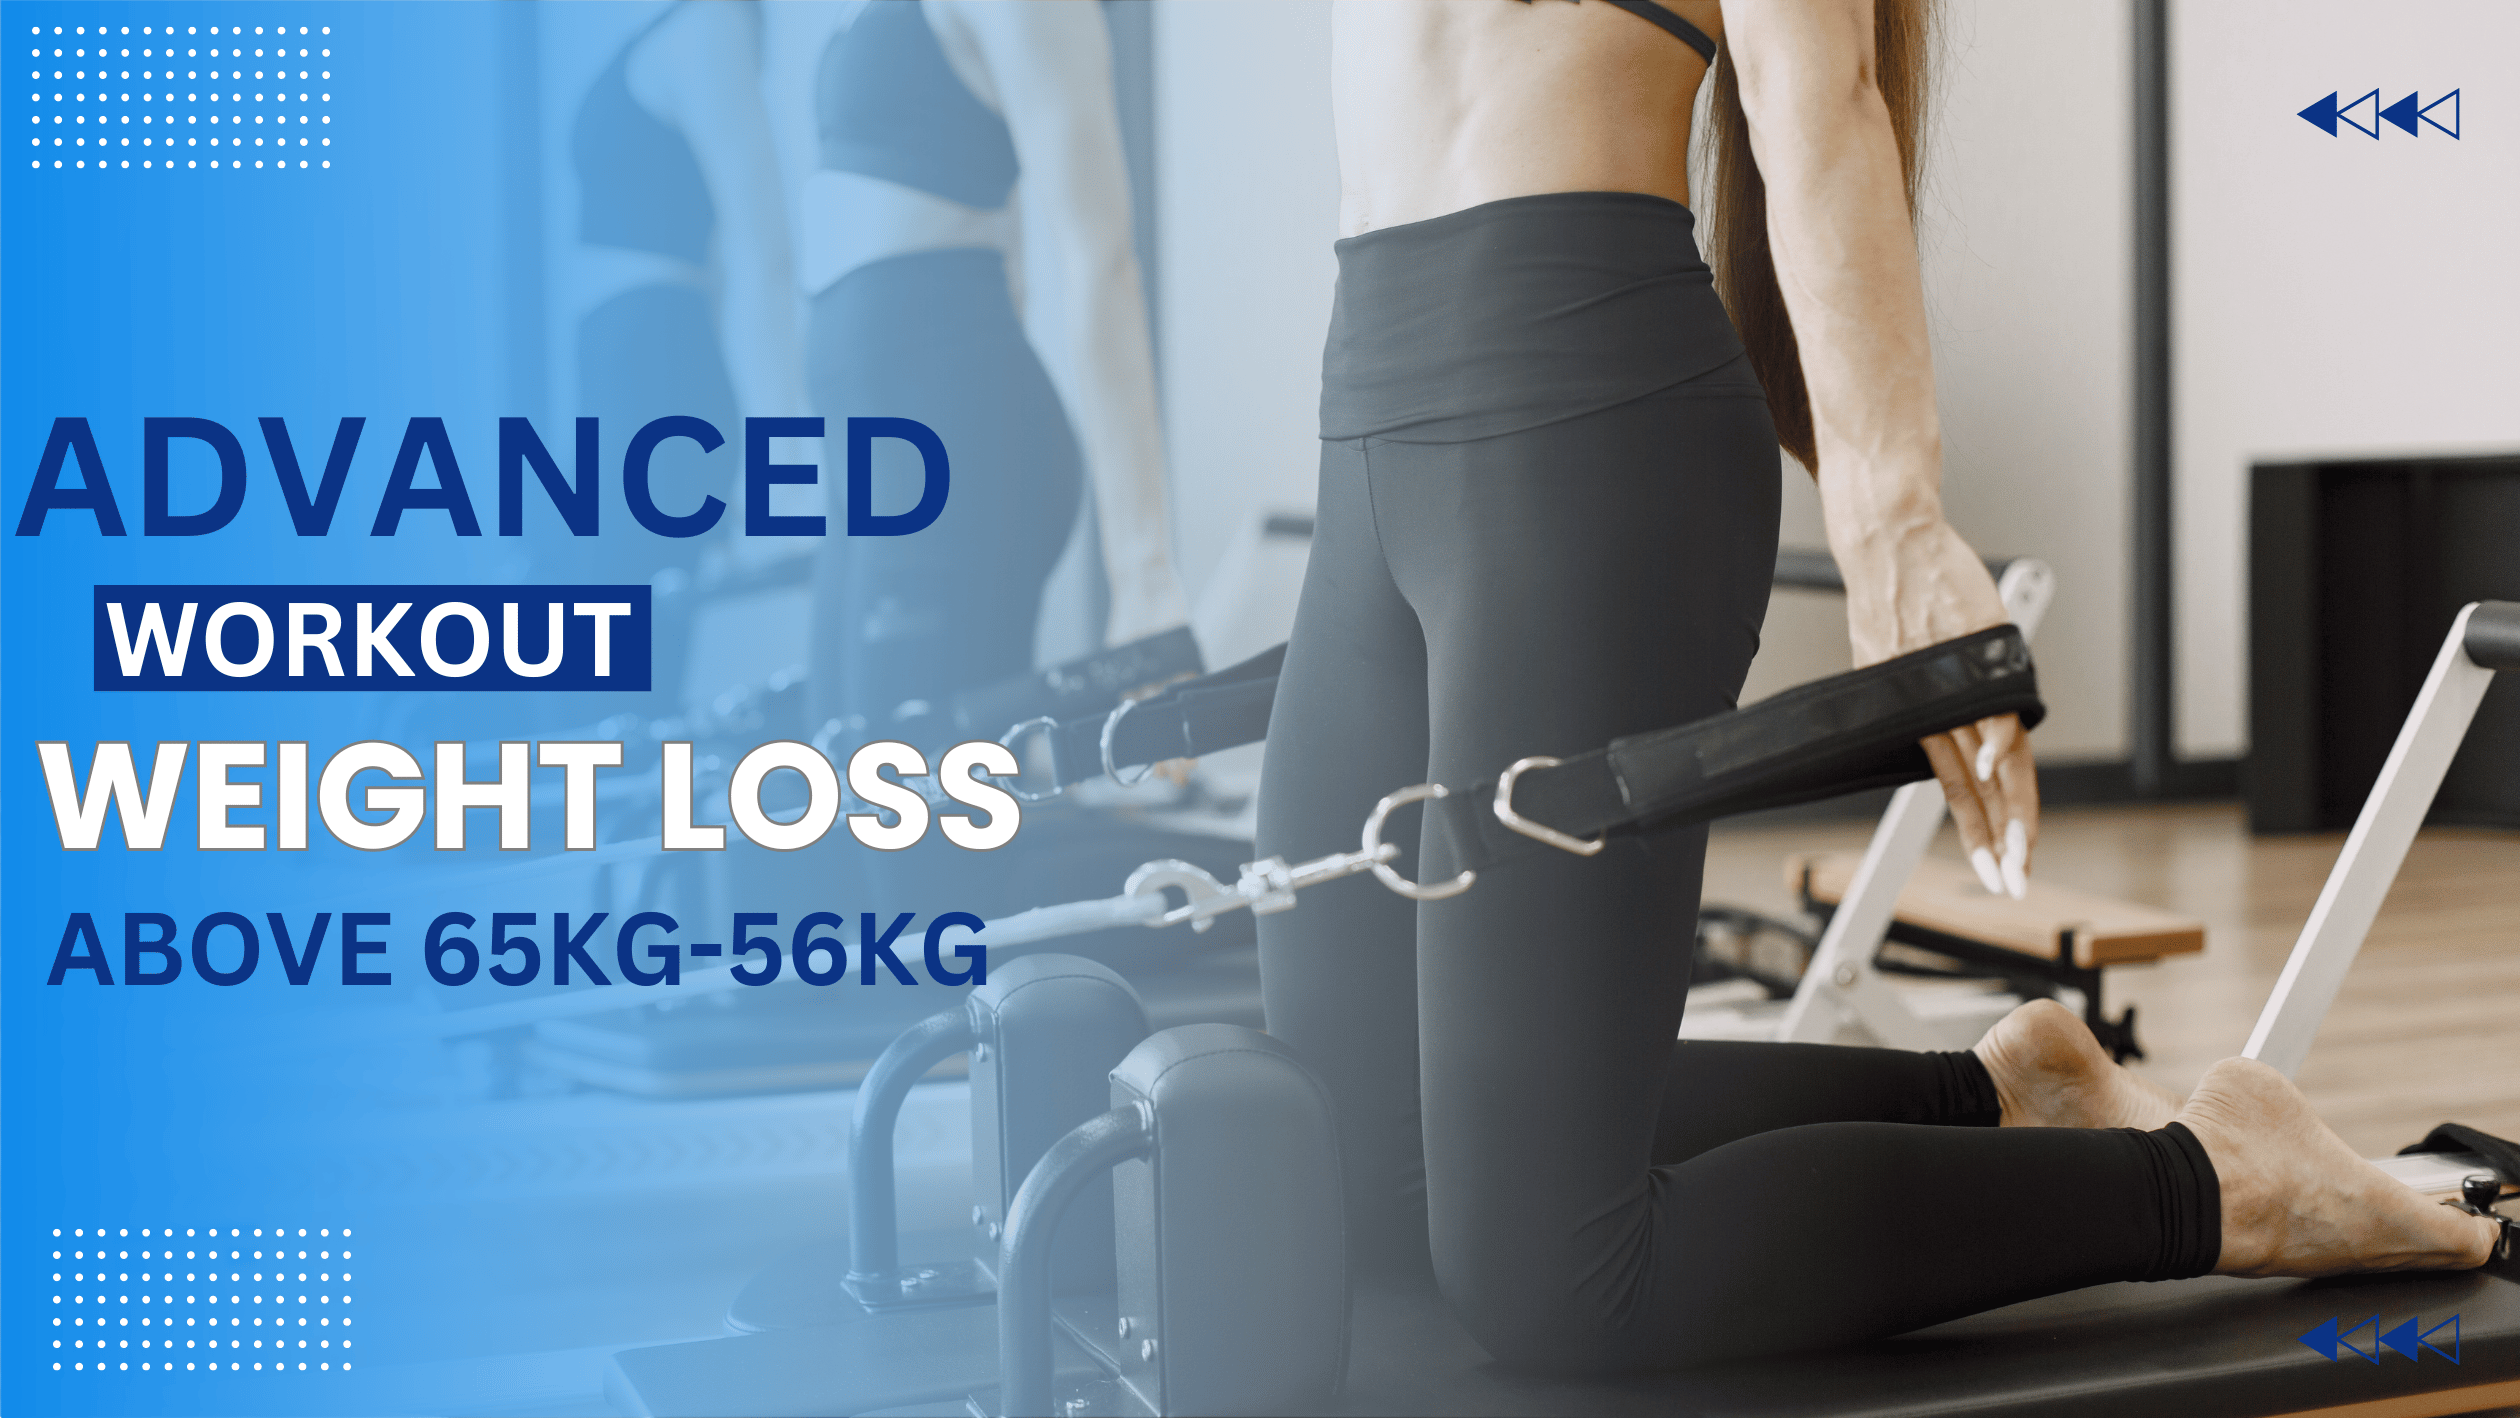 You are currently viewing ADVANCED WEIGHT LOSS WORKOUT PLAN FOR INDIVIDUALS ABOVE 65KG-56KG PEOPLE